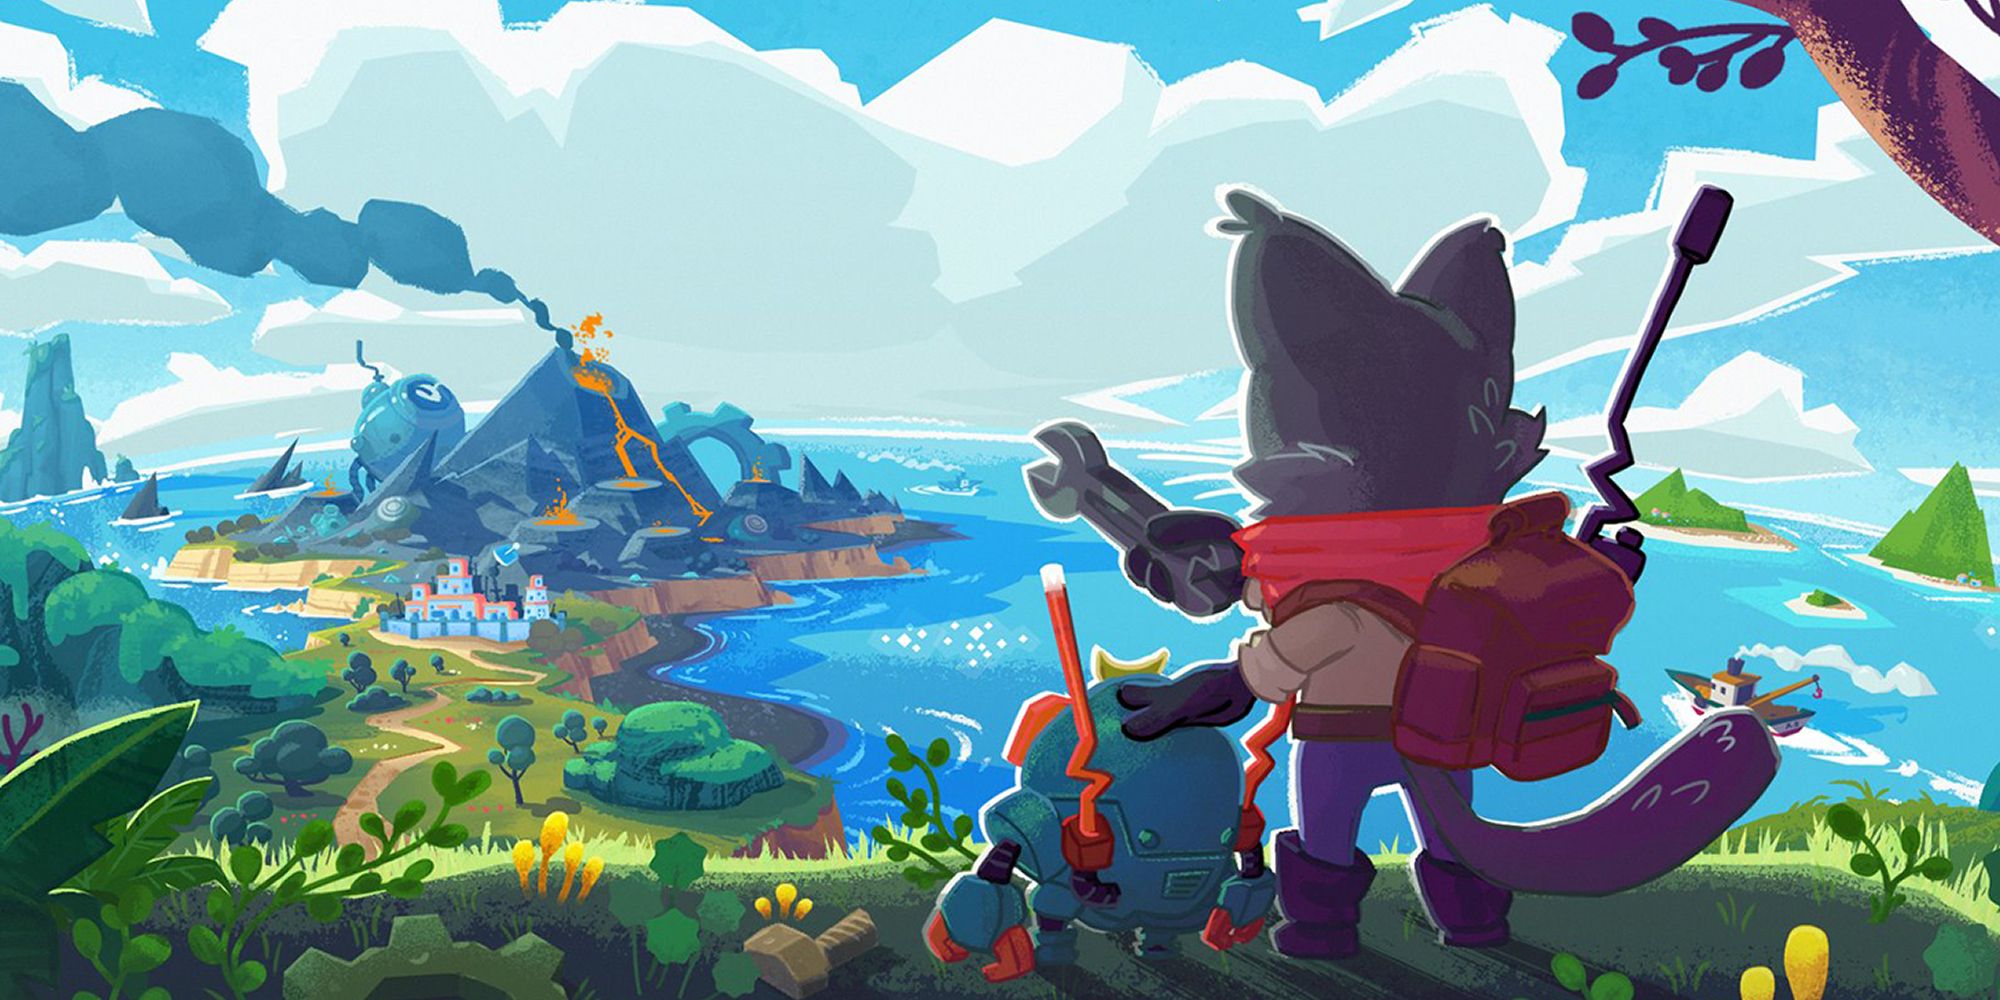 Botworld Adventure Artwork Depicting The Hero And A Bot Looking Out At The Land